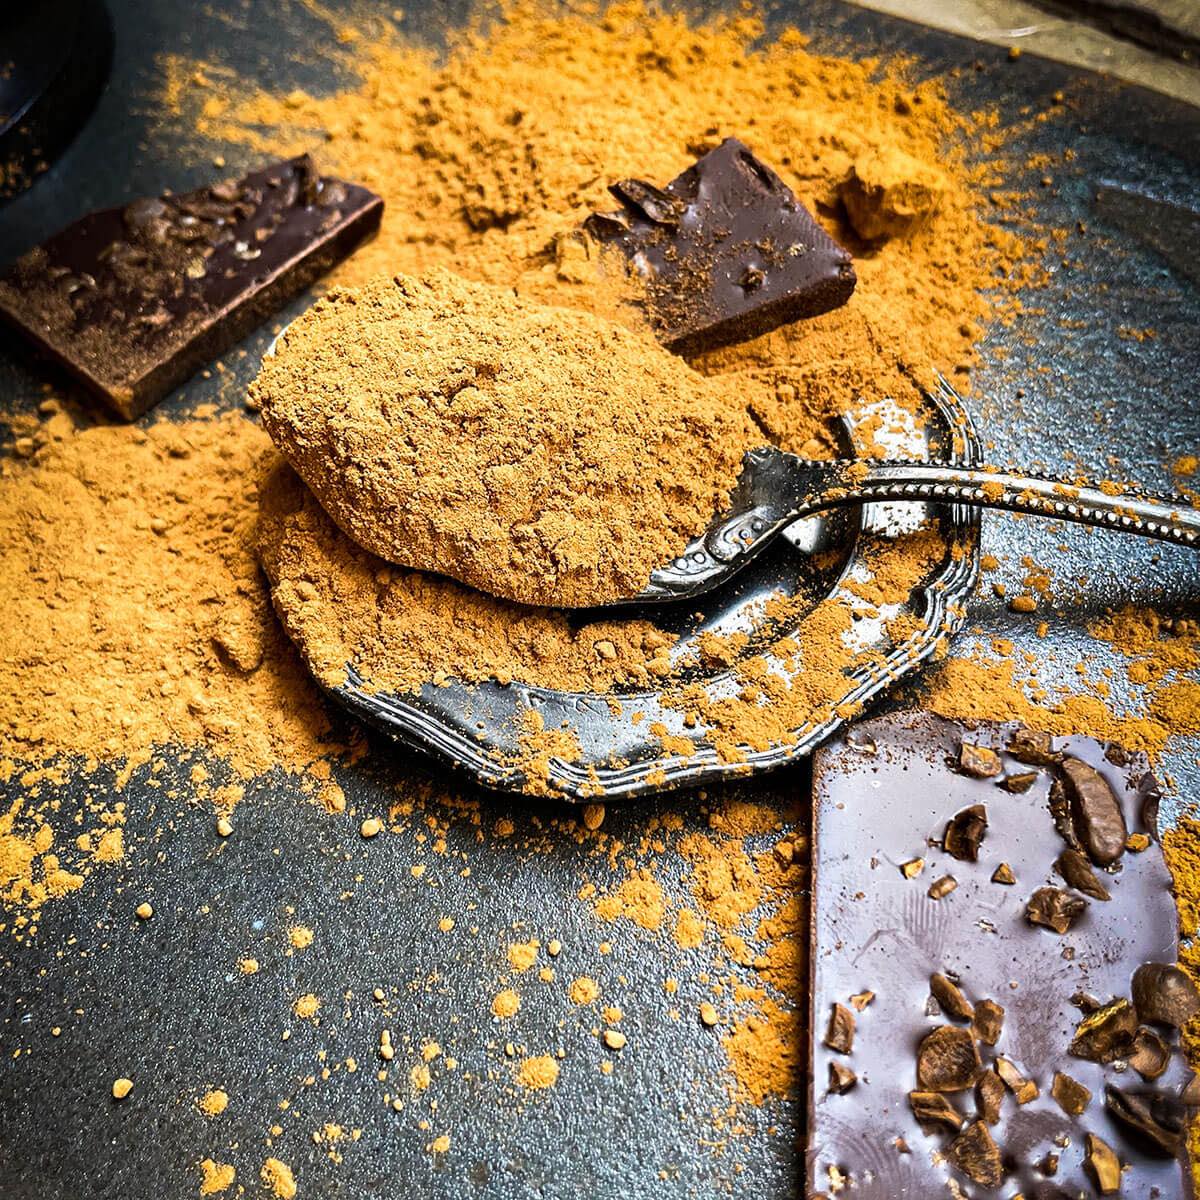 Carob powder in a spoon on a dark background with chocolate bars